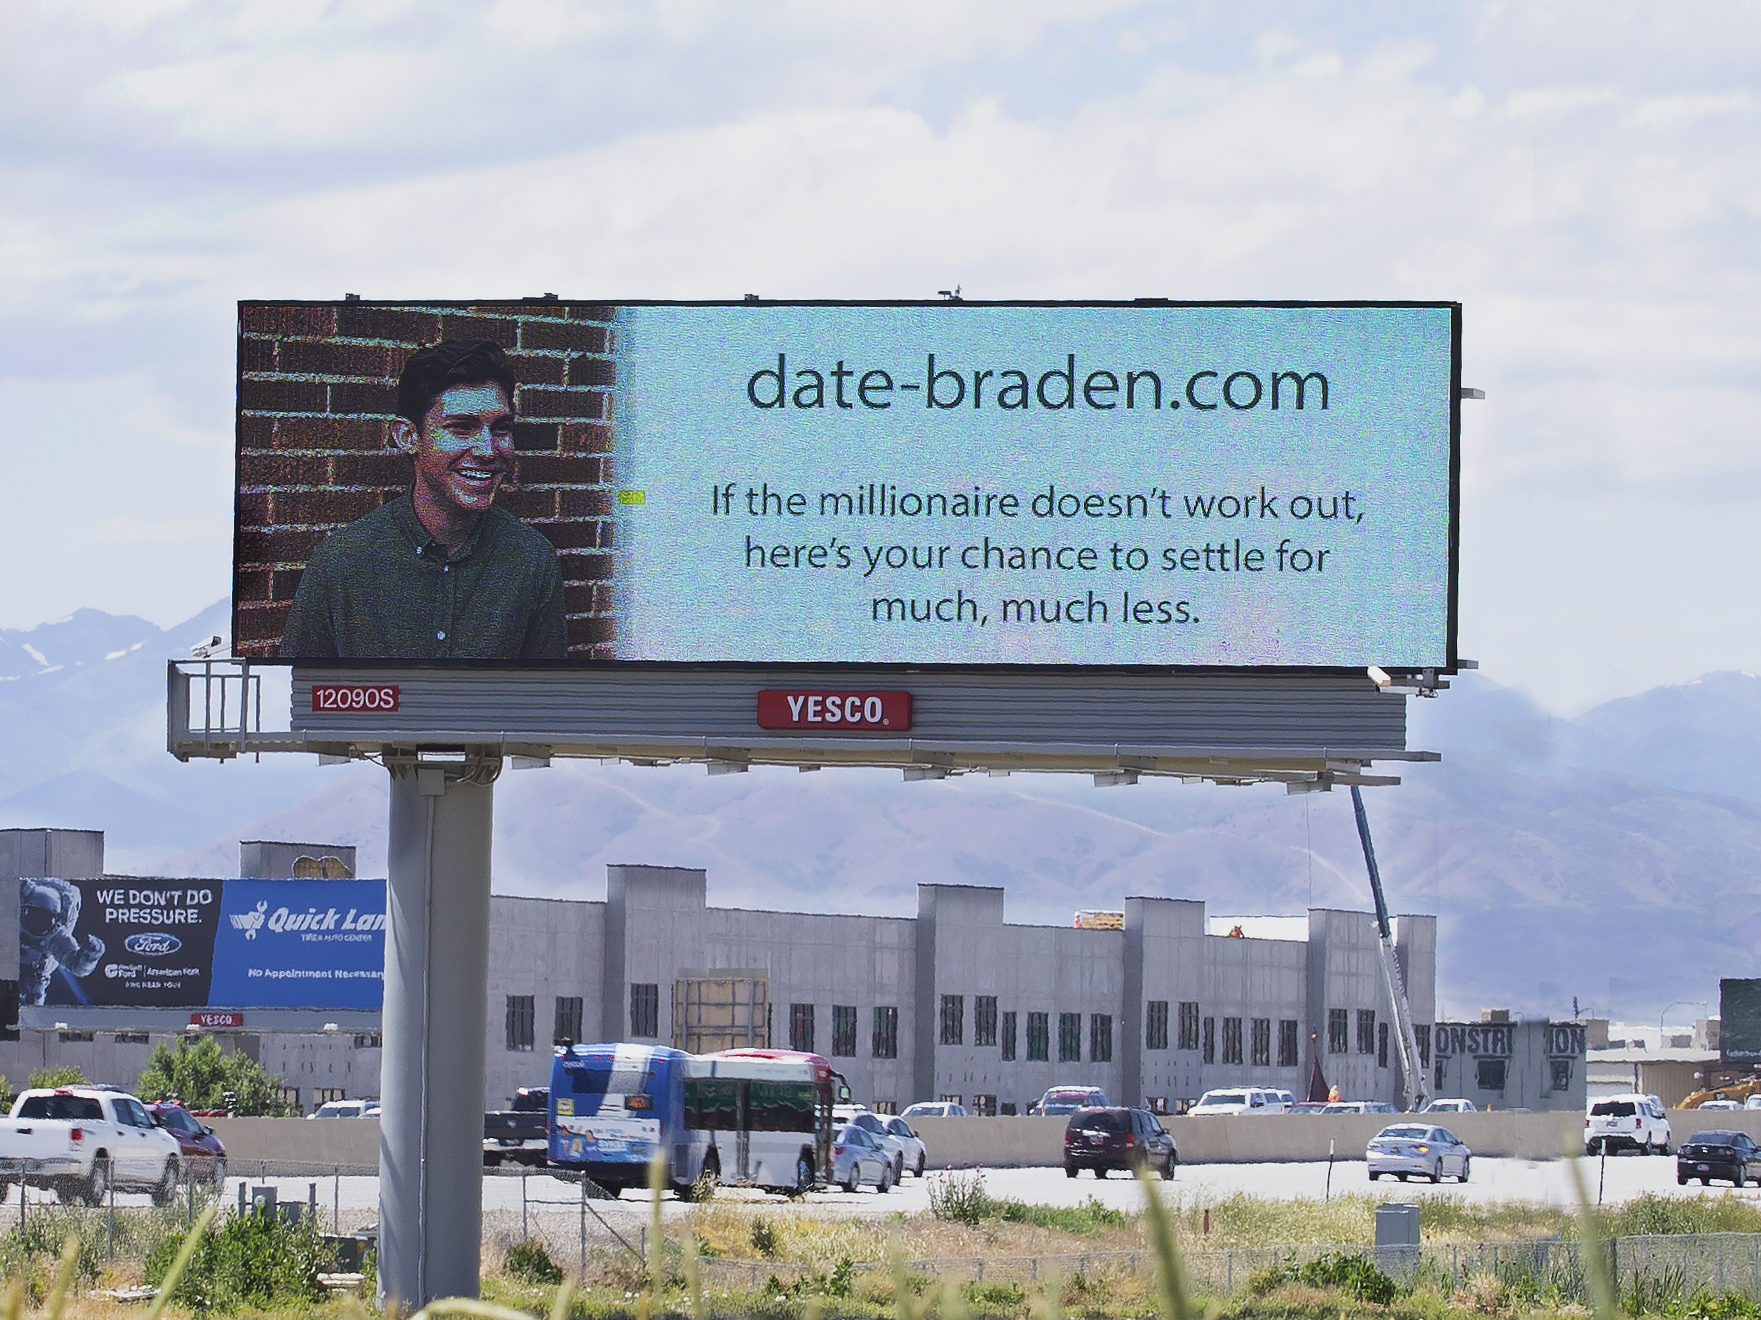 True love will find you in the end' billboard appears along I-35